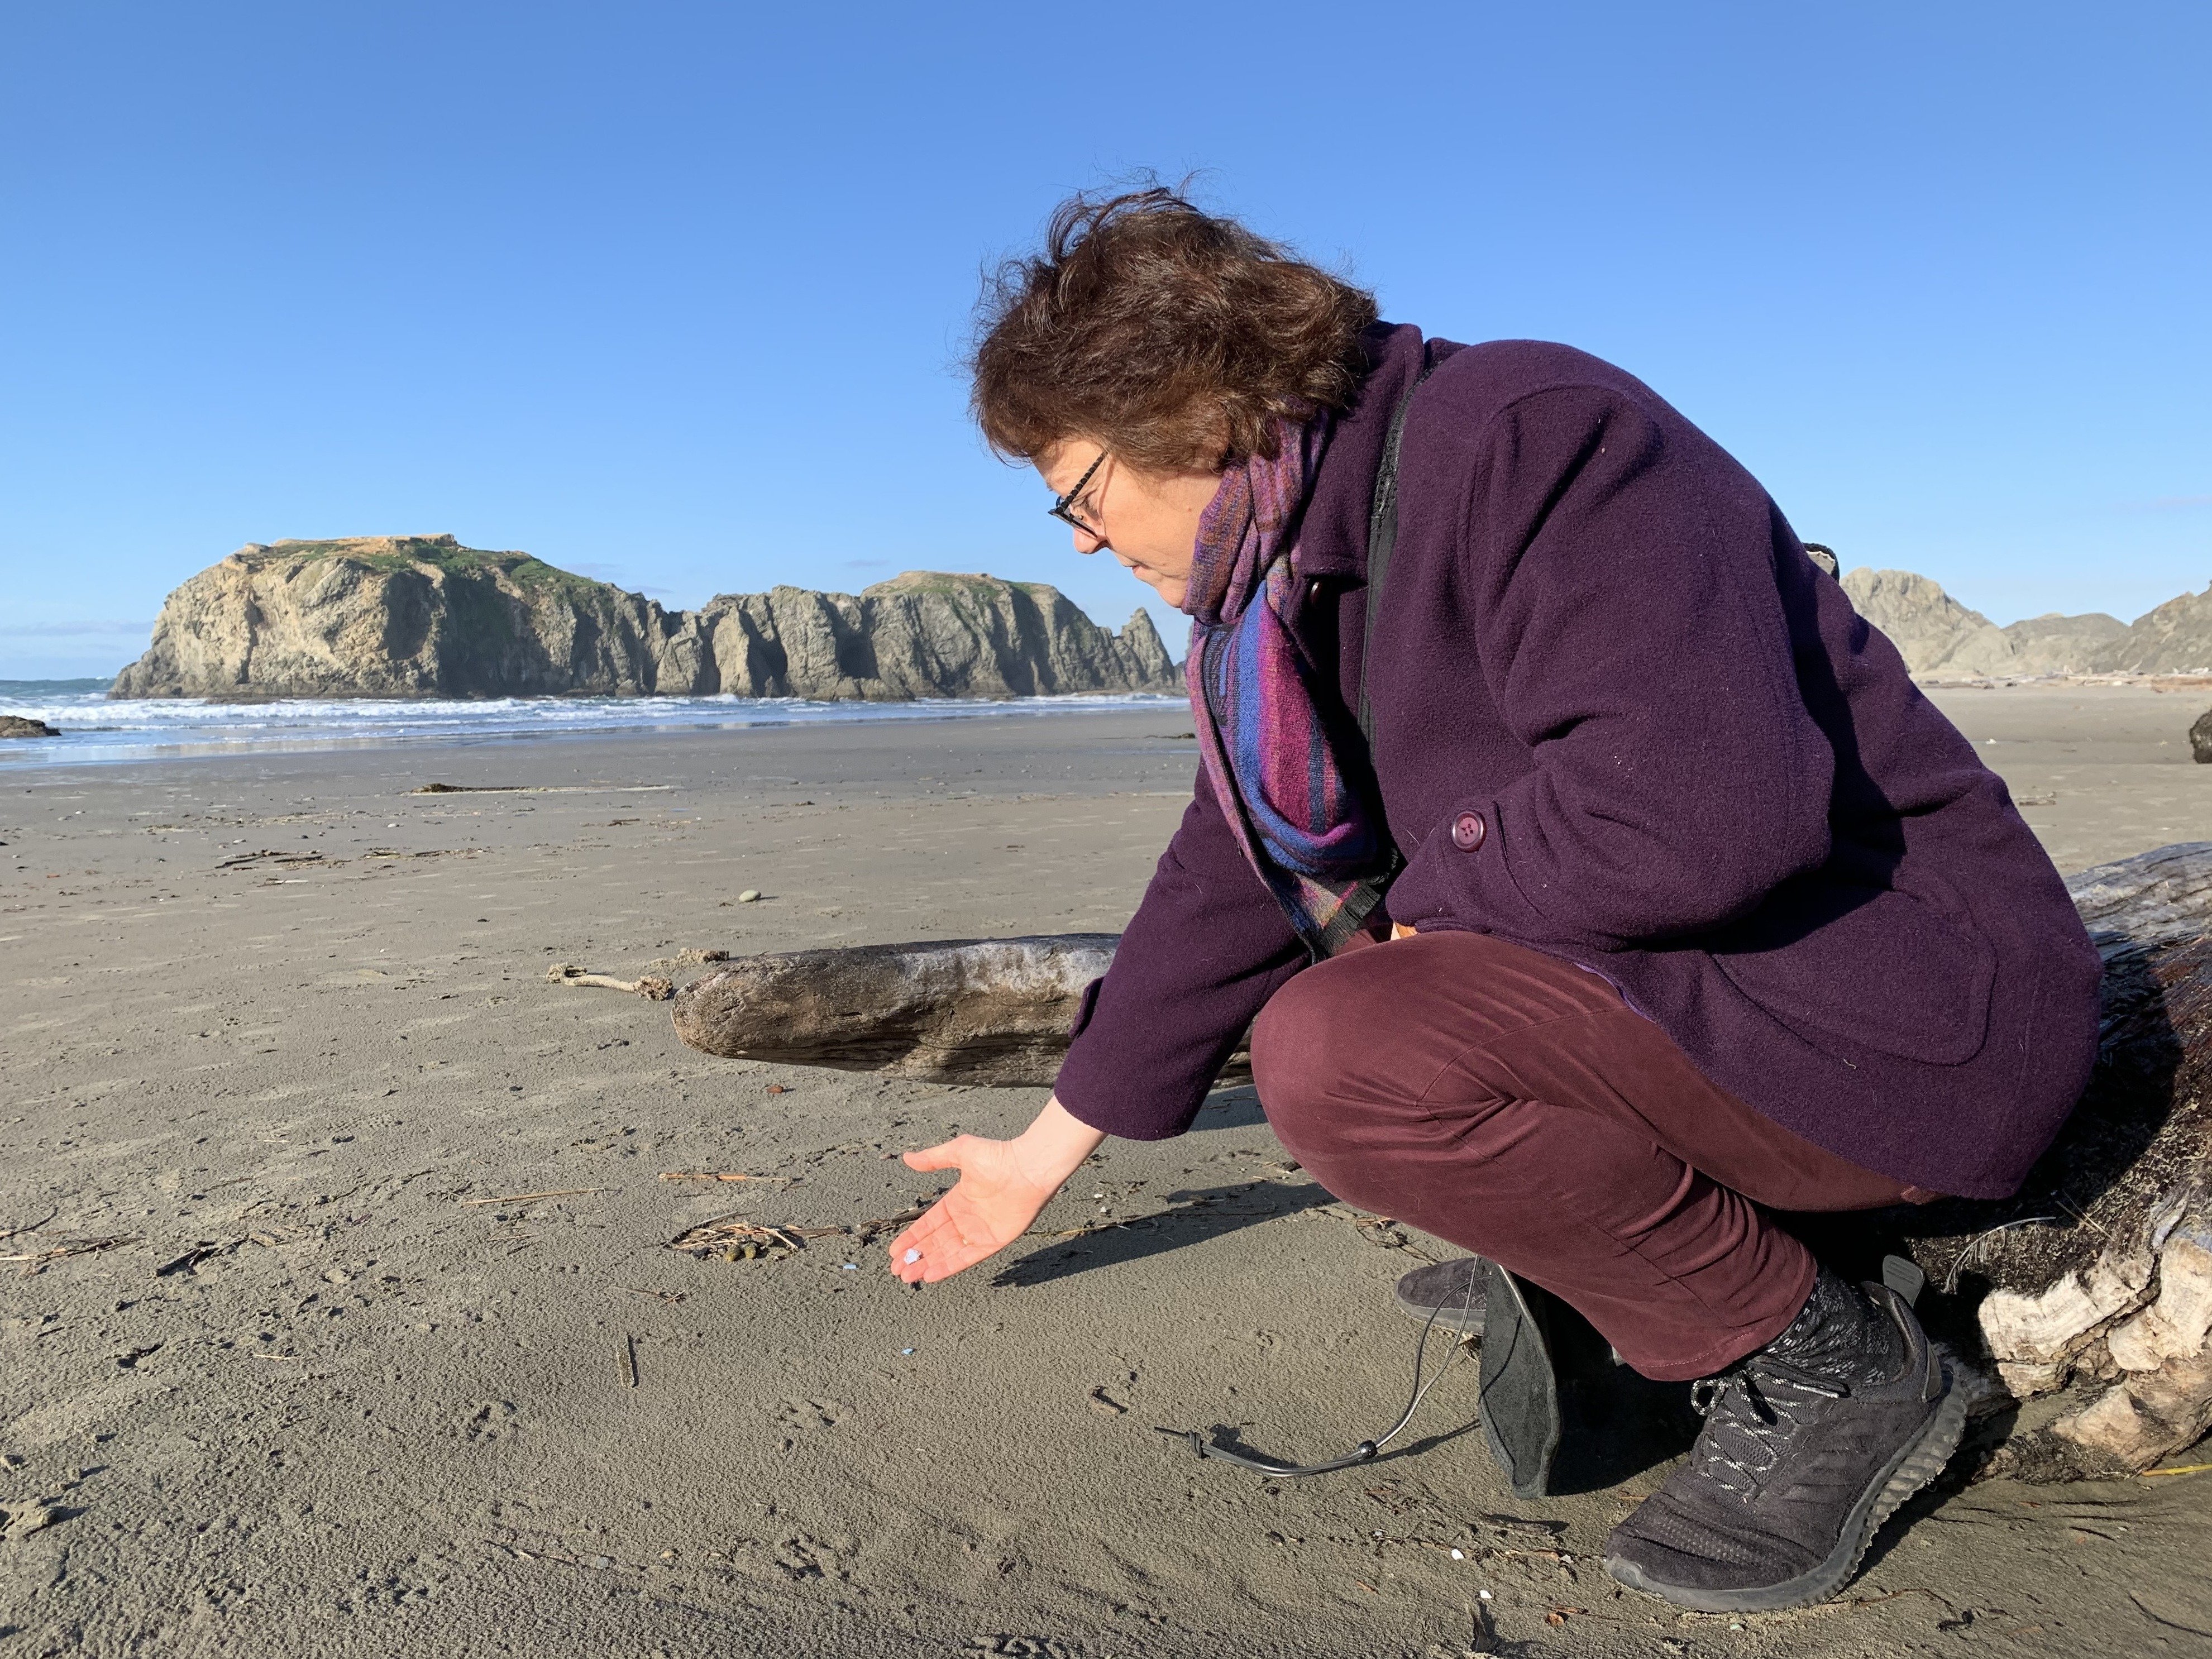 Angela Haseltine Pozzi founded Washed Ashore in 2010. The nonprofit turns plastics taken from Oregon's beaches into eye-opening sculptures of threatened marine life. CREDIT: Kirk Siegler/NPR